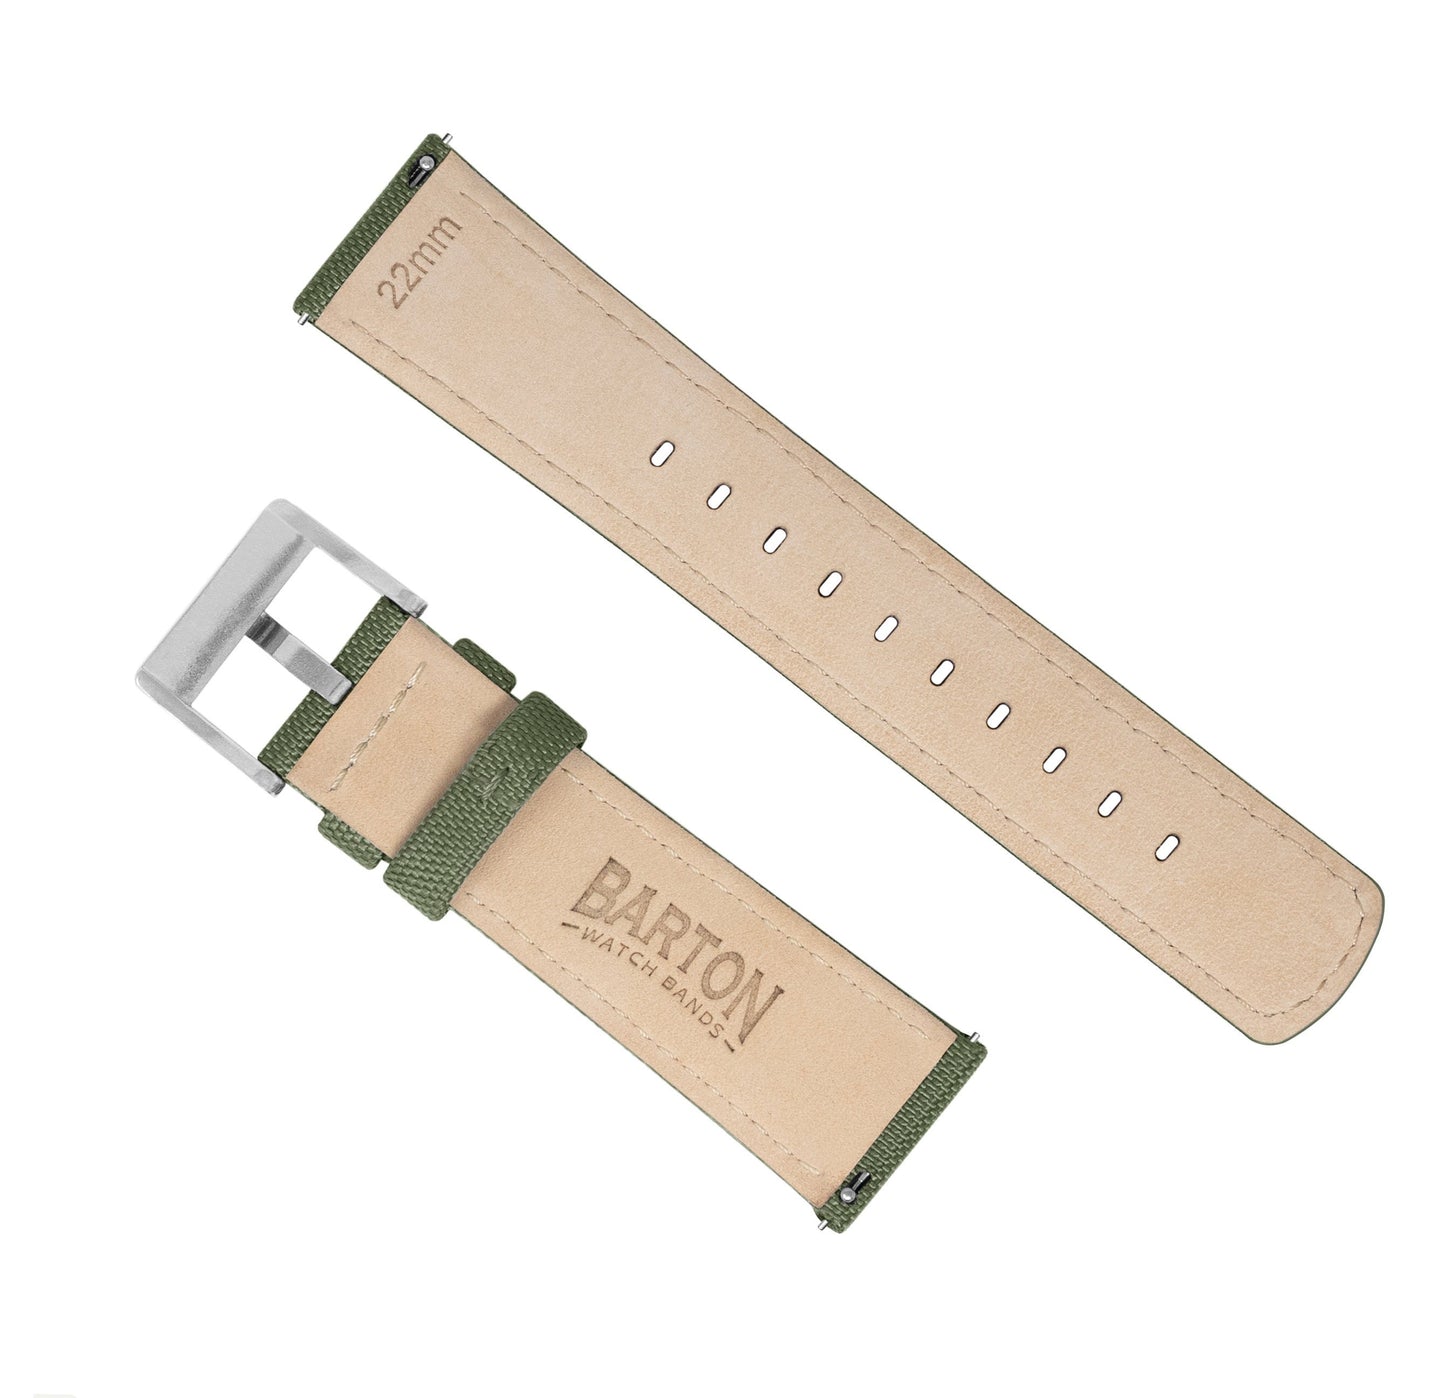 Fossil Q | Sailcloth Quick Release | Army Green - Barton Watch Bands